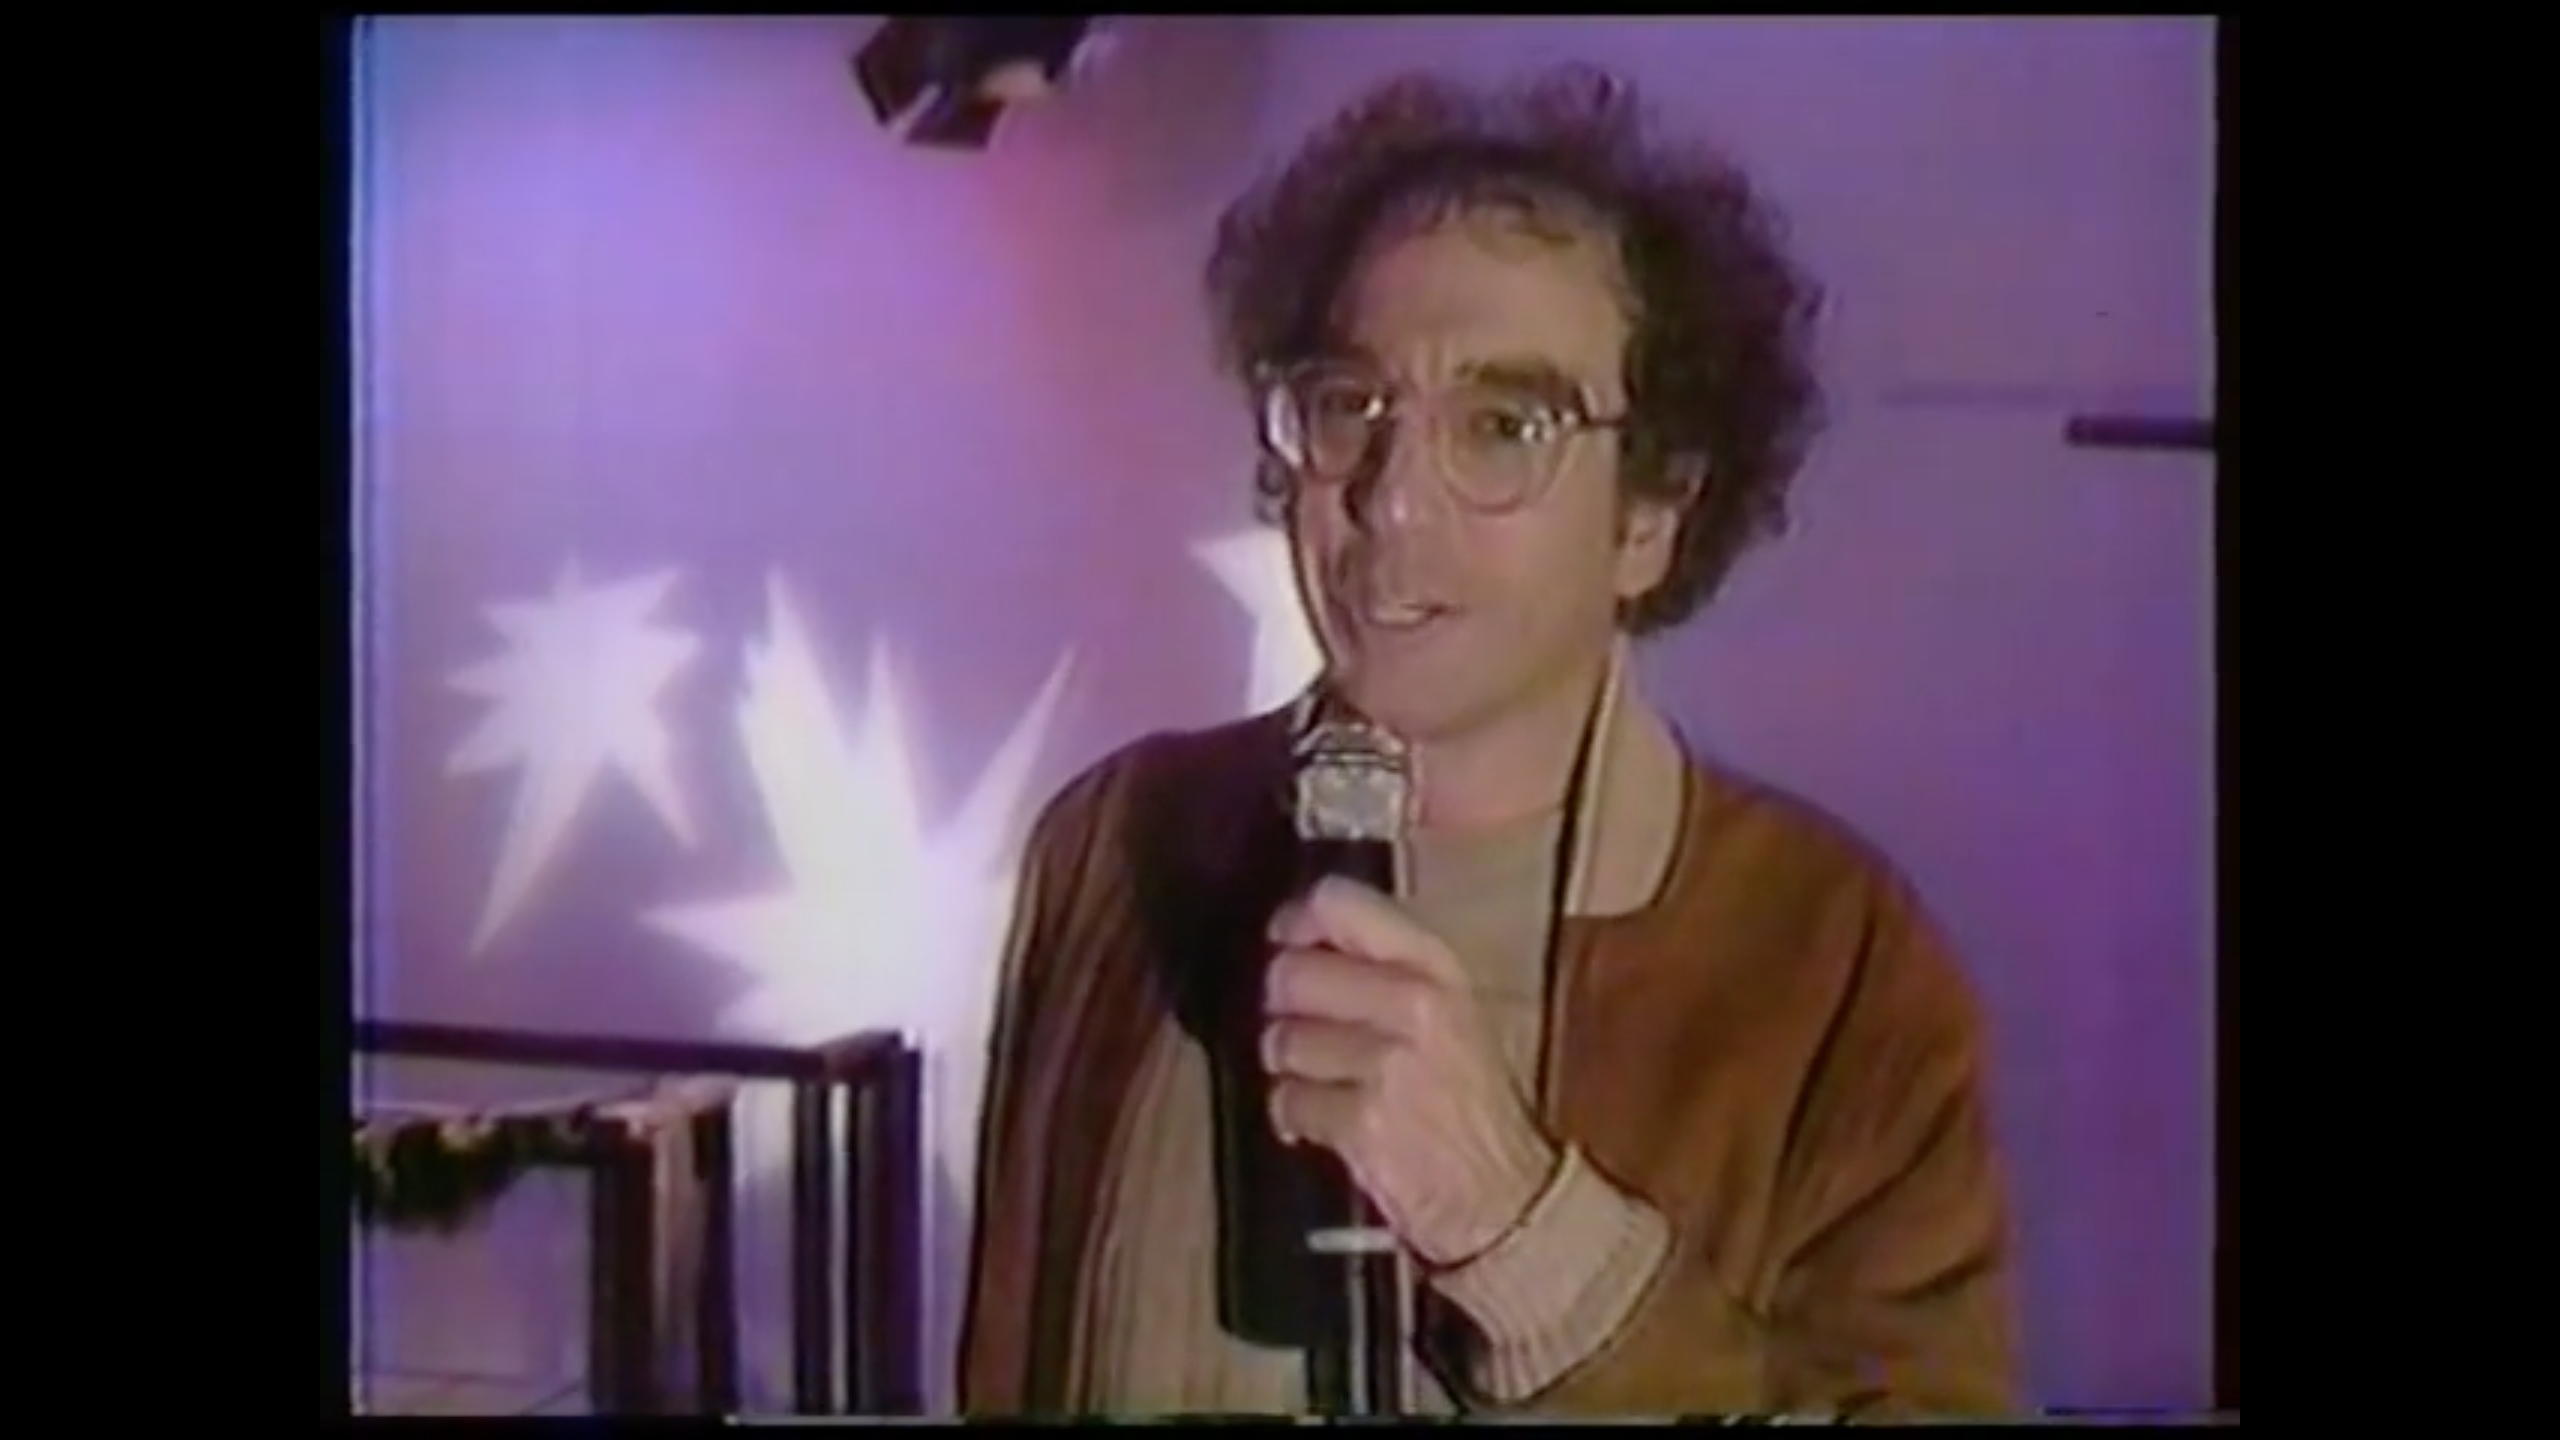 Photo of a very young Larry David on the Evanston, Illinois cable TV show The Friday Club in 1981.